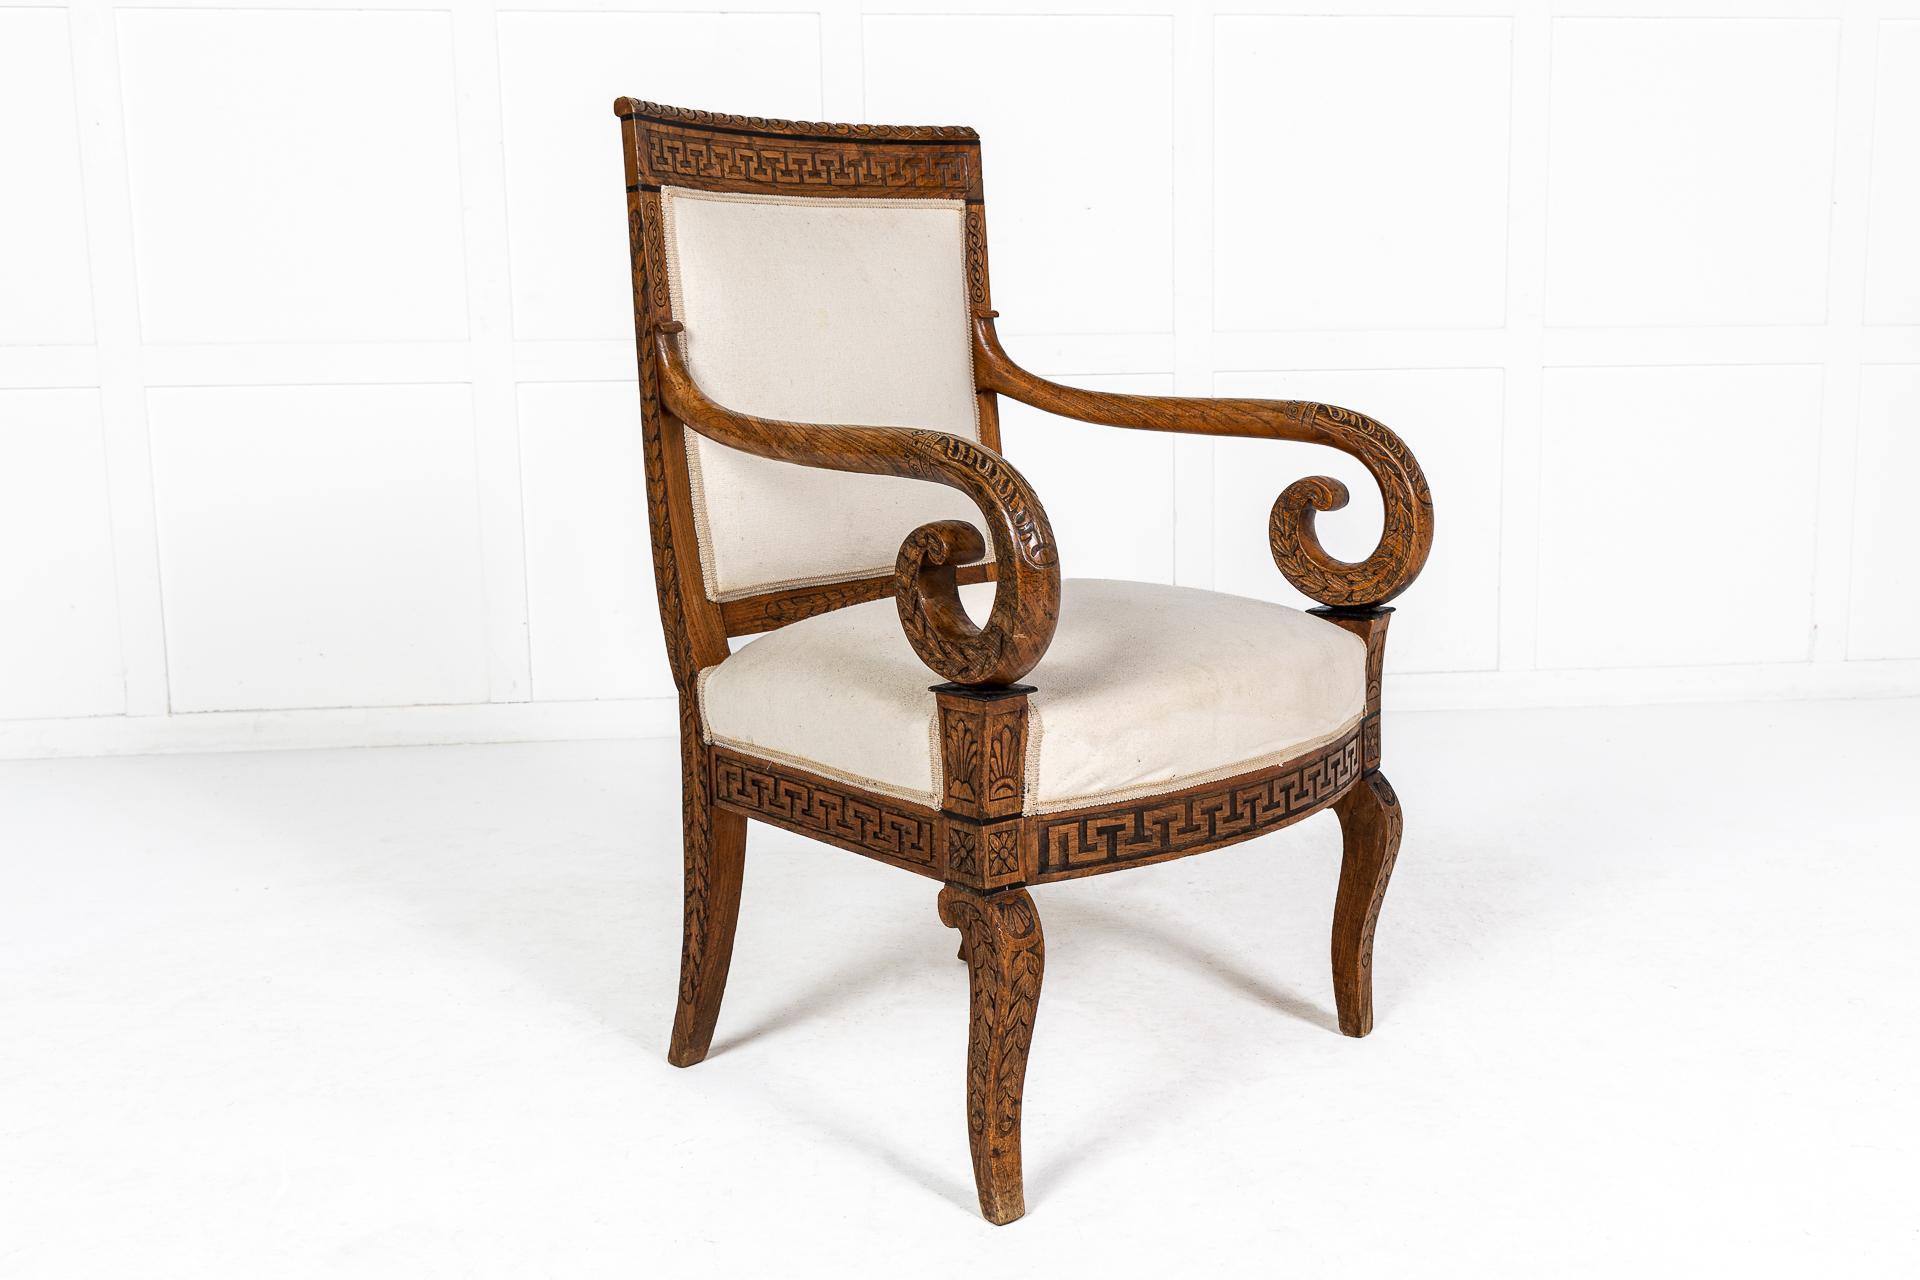 Matched Pair of 19th Century French Carved Wood Chairs For Sale 6